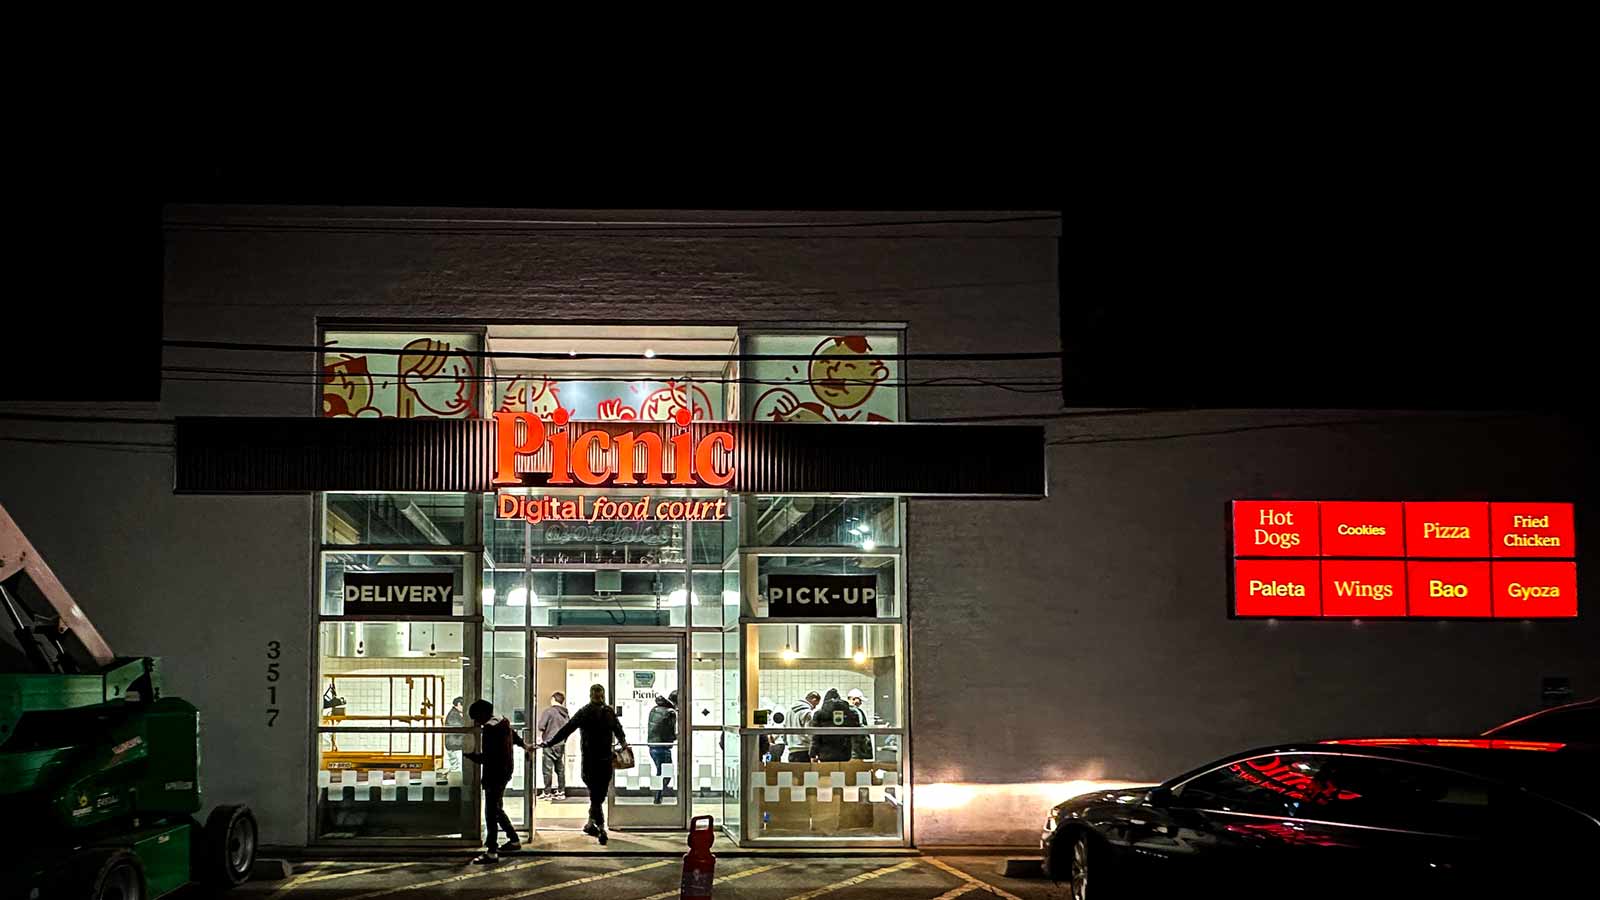 picnic digital food court store sign installed on the facade